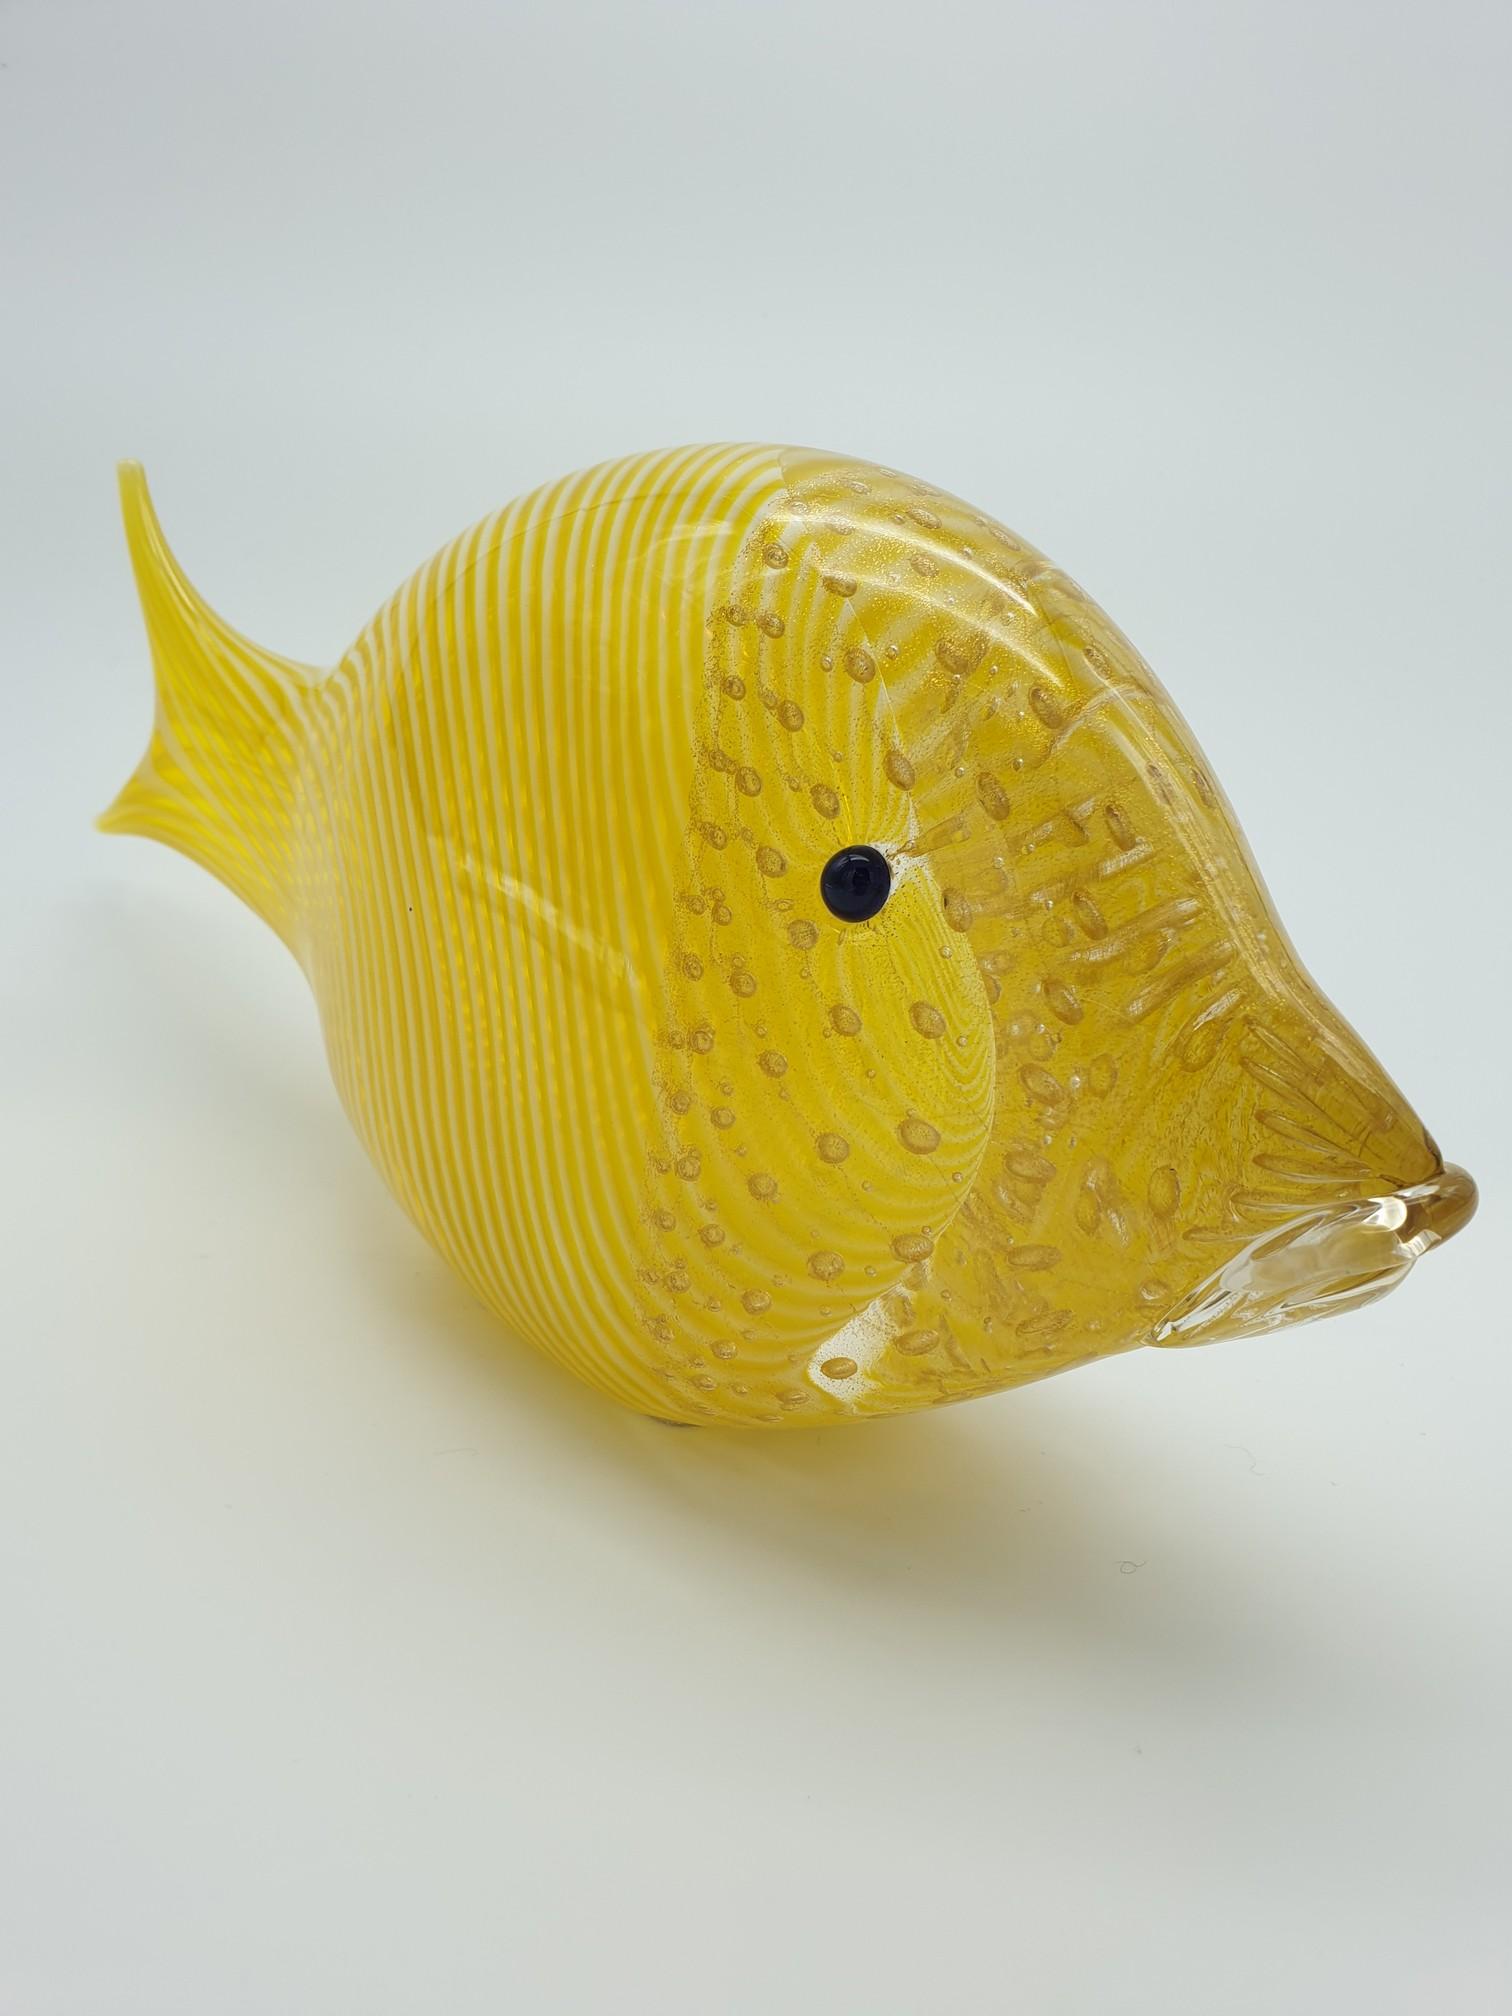 This stunning fish was handmade in Murano Italy by Gino Cenedese e Figlio in the late 1990s. This fish is to be regarded as a collector's item, since it was not part of a regular production/collection. The fish body is a bright yellow color with an